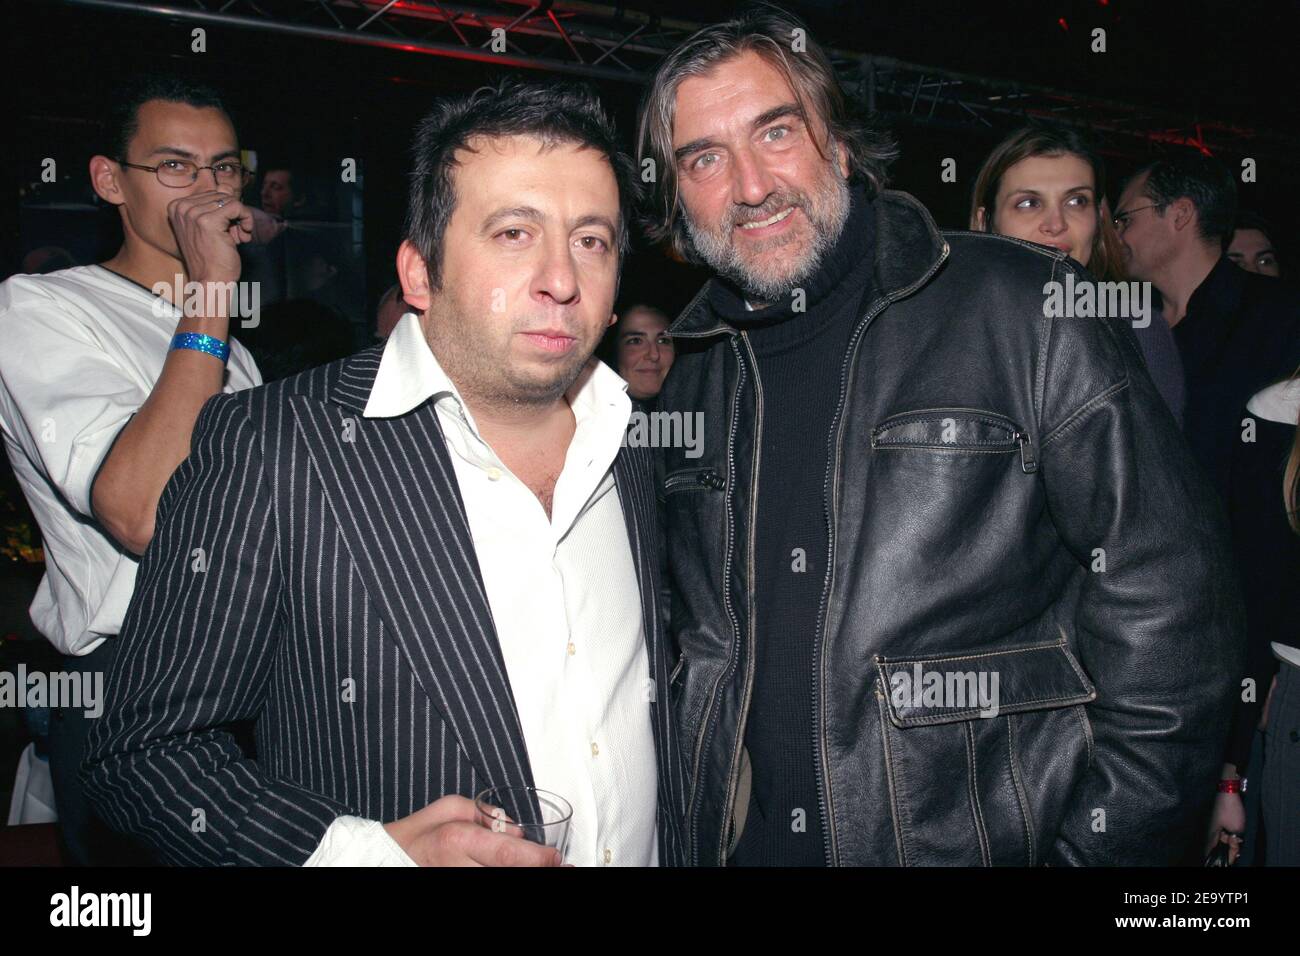 French humorist, movie director and cast member Michel Muller (L) with cast member Pierre-Ange Le Pogam at the after party for the premiere of Muller's movie, 'La vie de Michel Muller est plus belle que la votre', at L'Etoile in Paris, France, on January 24, 2005. Photo by Benoit Pinguet/ABACA. Stock Photo